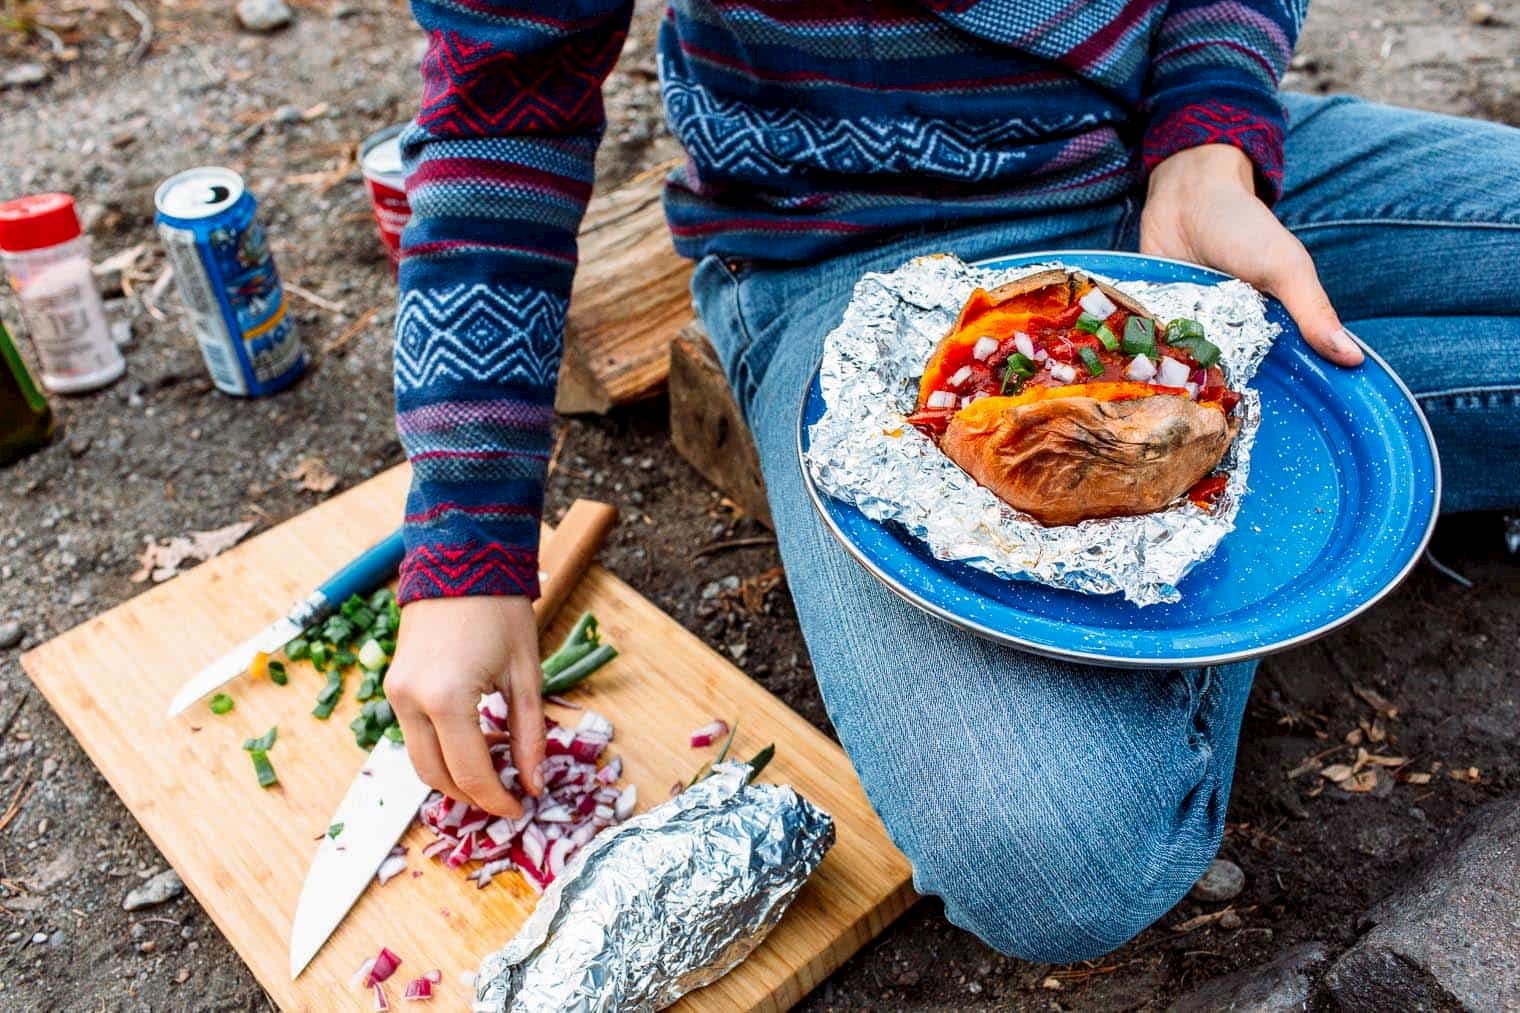 https://blog-assets.thedyrt.com/uploads/2020/10/foil-wrapped-baked-sweet-potatoes-with-chili-camping-meal-7-1.jpg